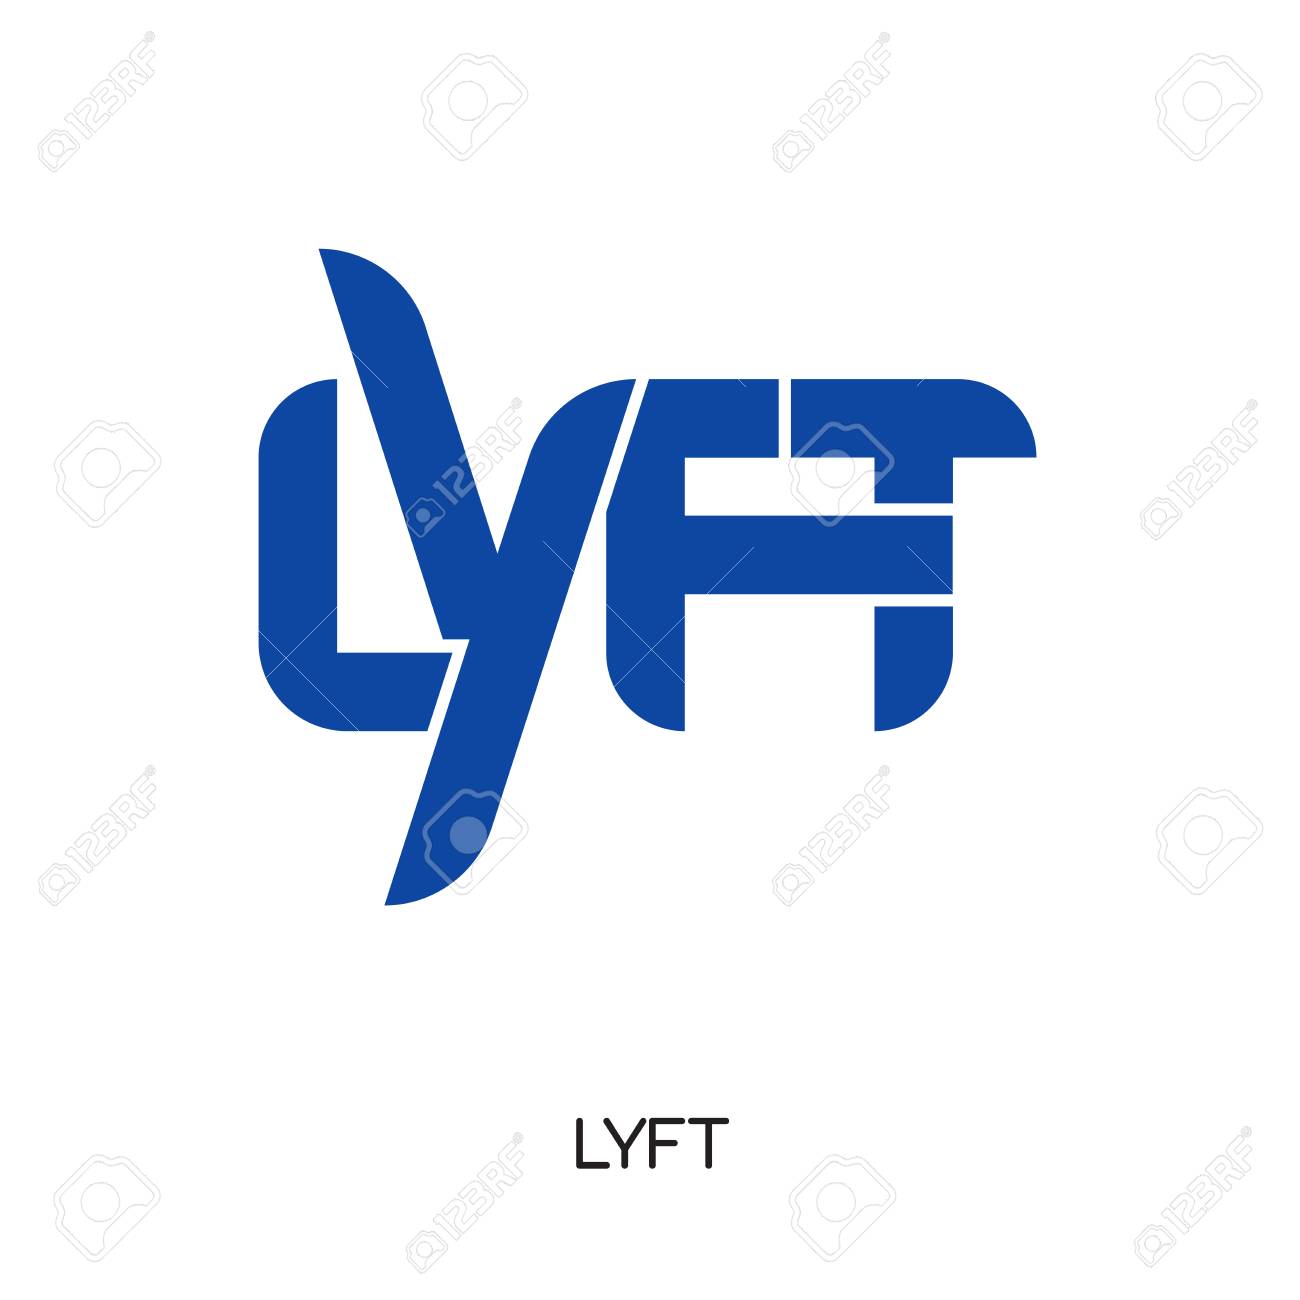 Lyft Logo Vector Isolated On White Background For Your Web And